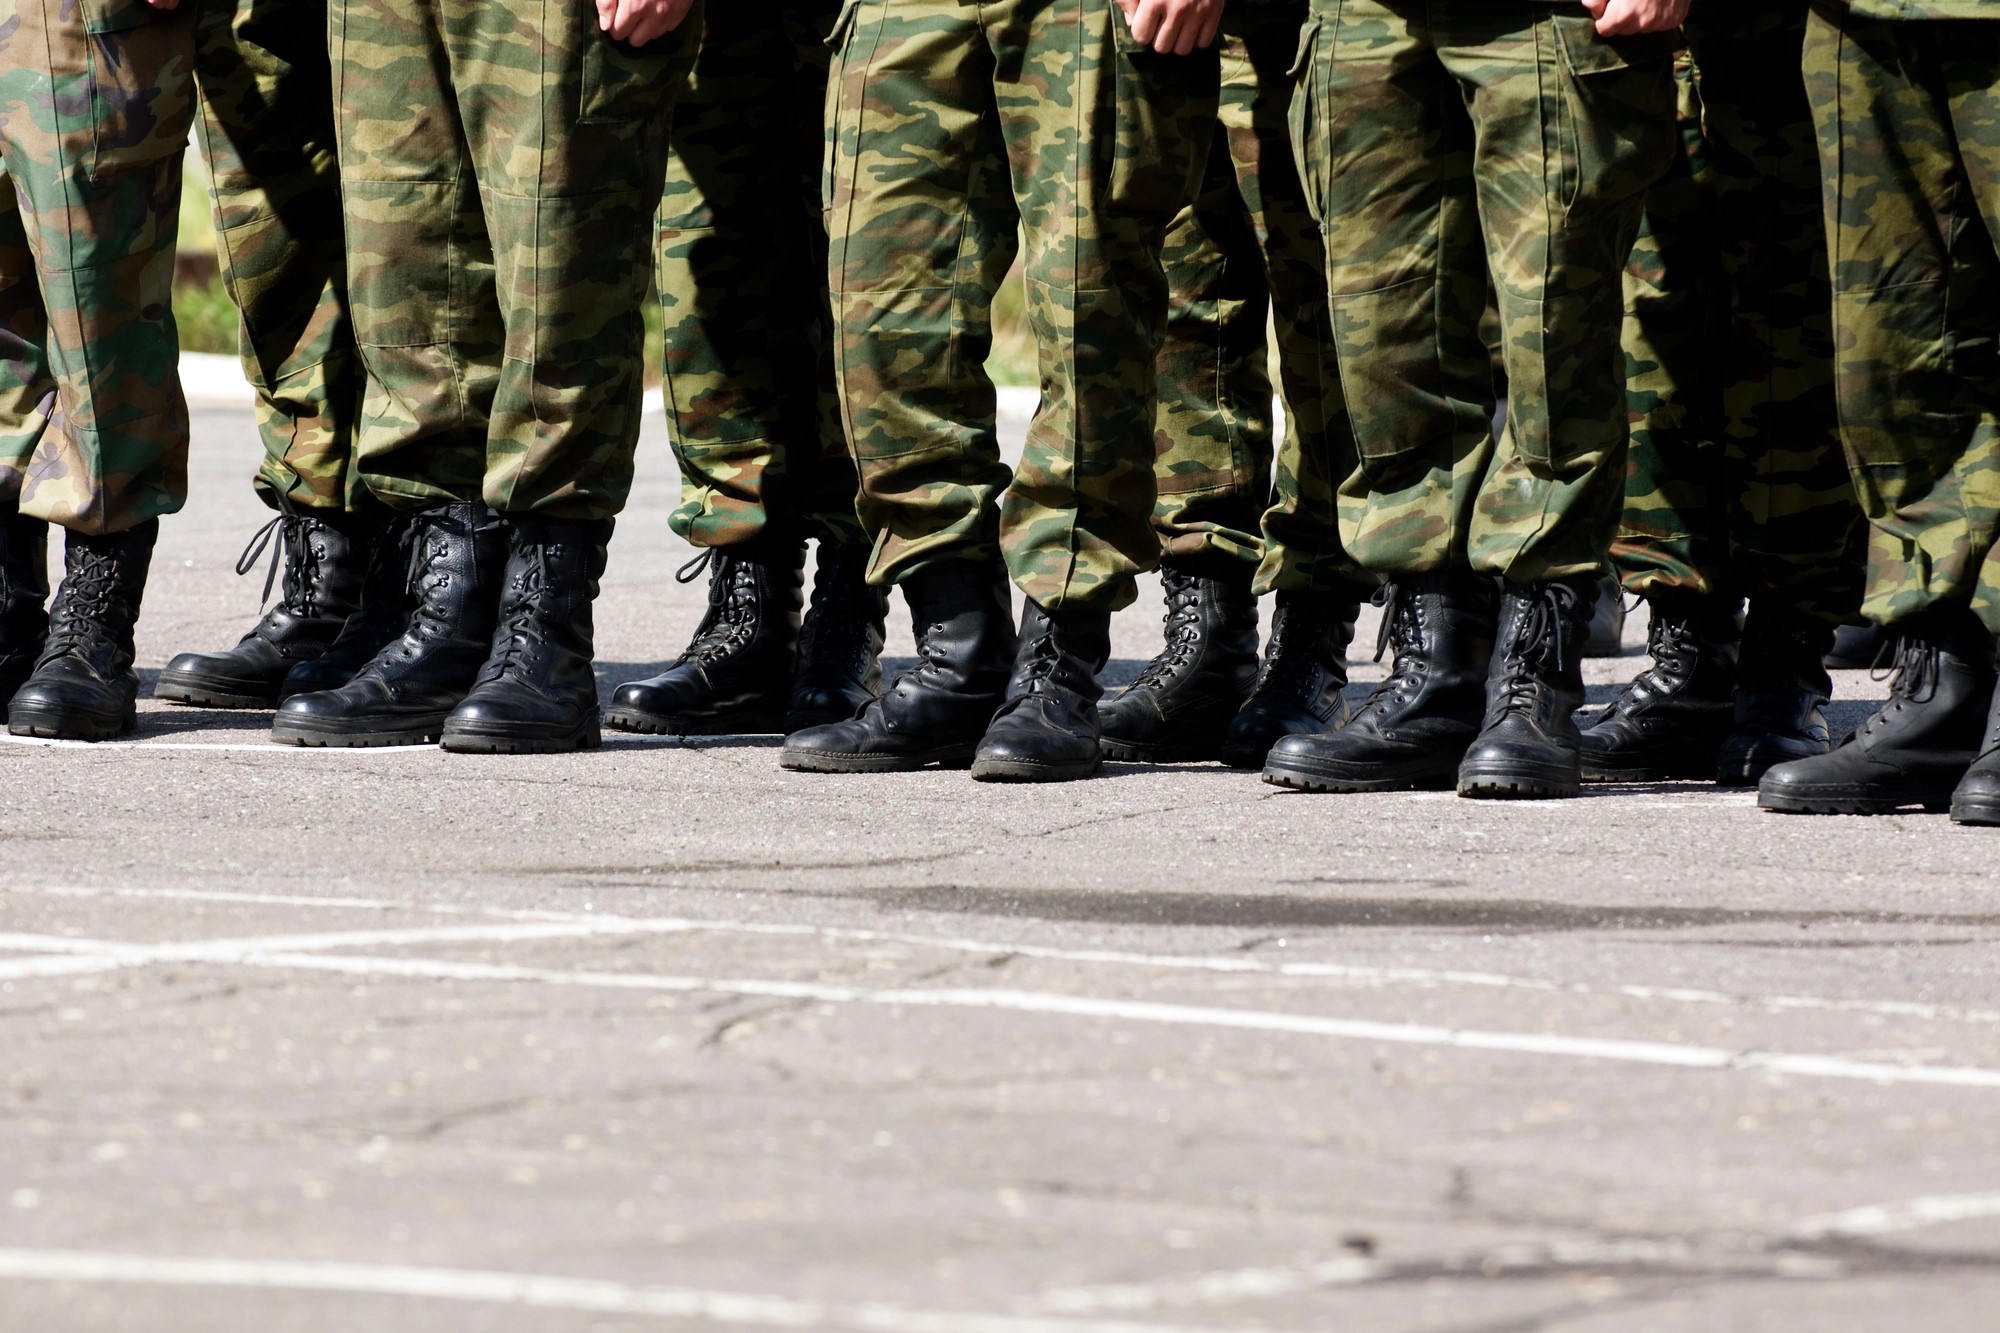 photograph of military boots and fatigues standing in line